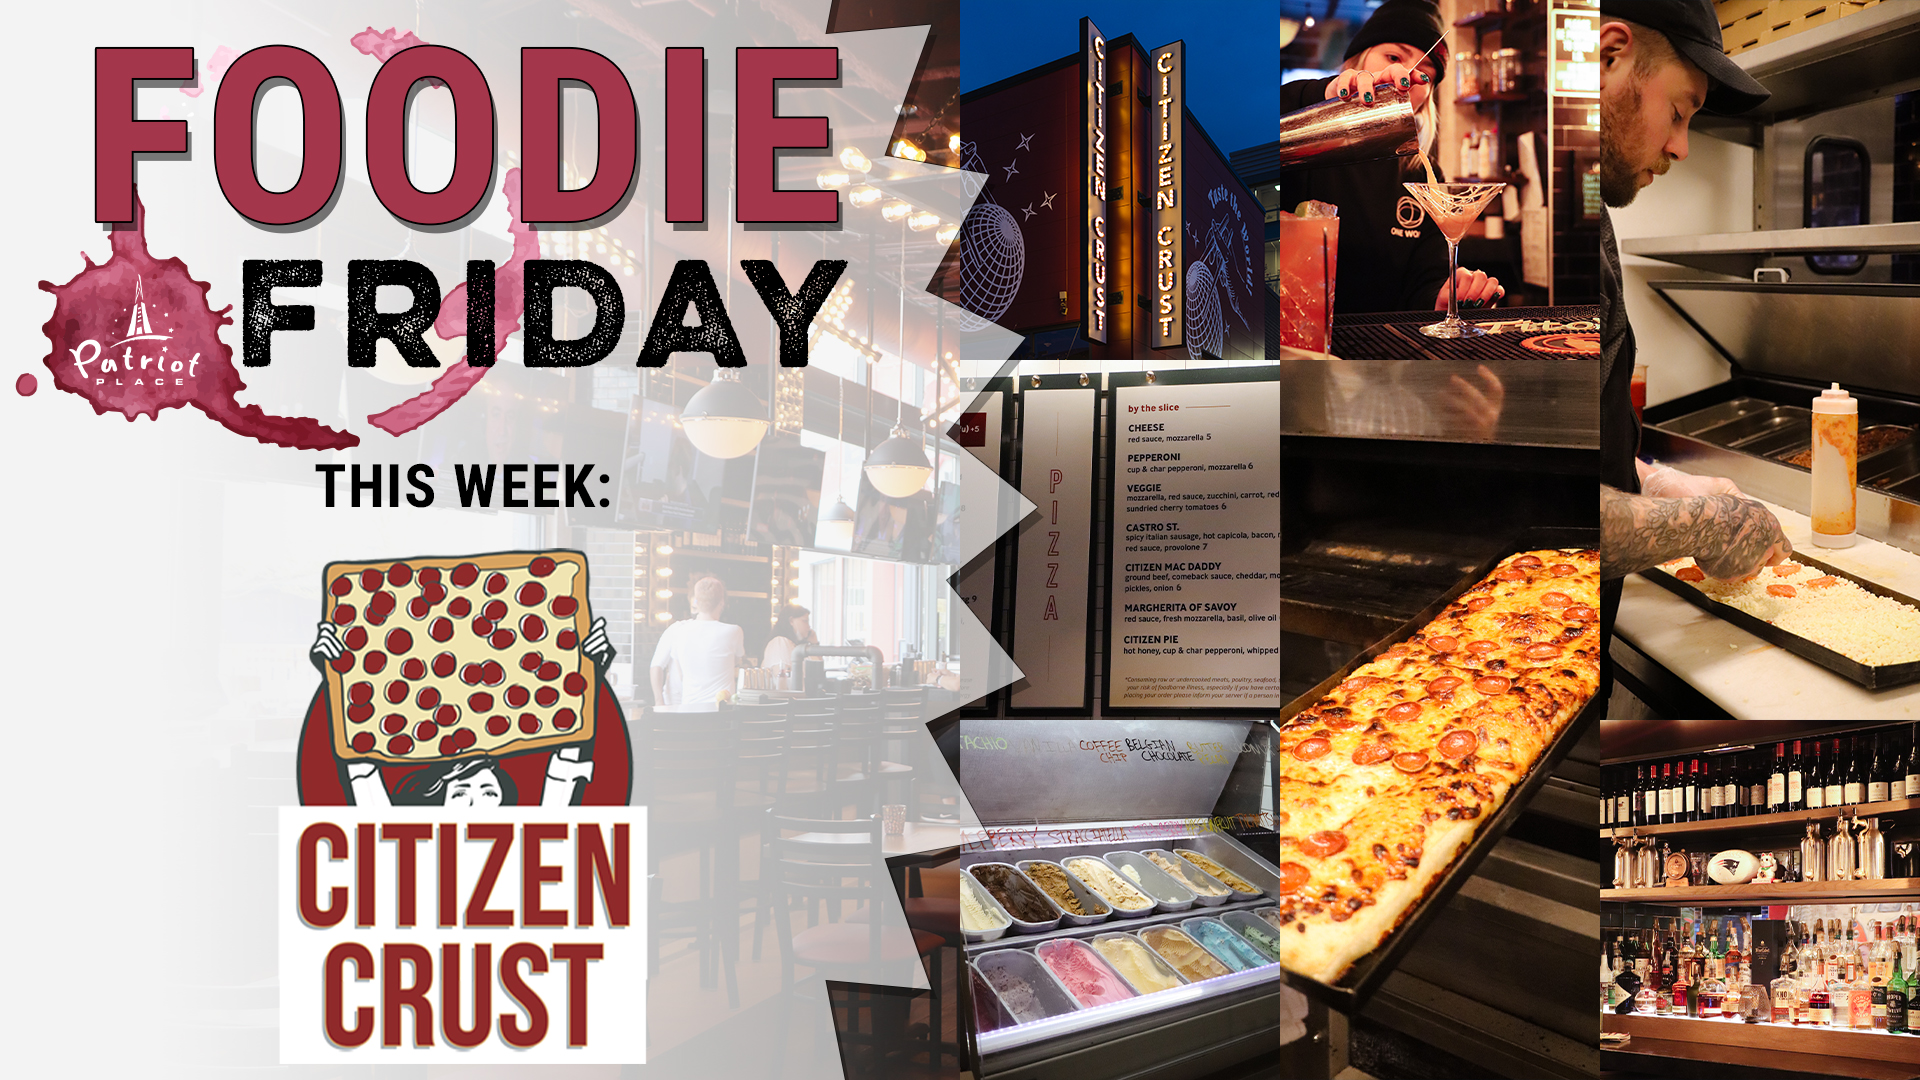 Patriot Place Foodie Friday Citizen Crust